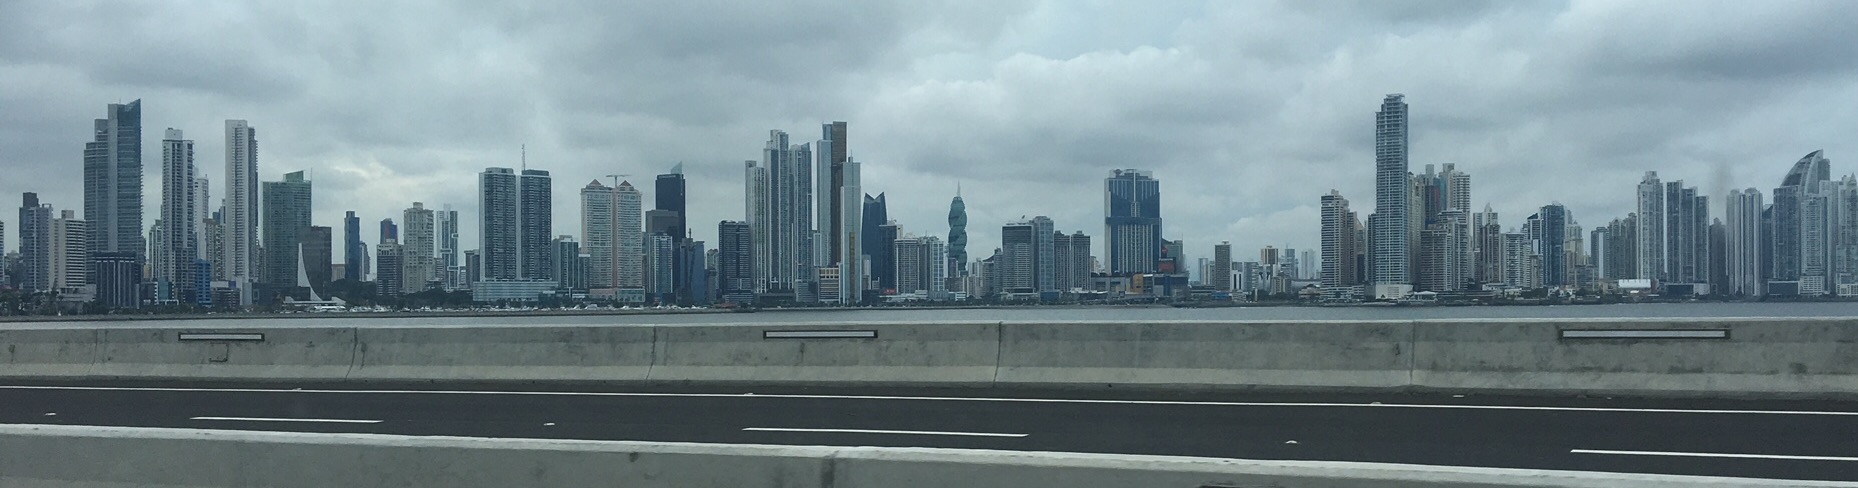 This skyline puts Miami to shame, and a lot of toher places as well.